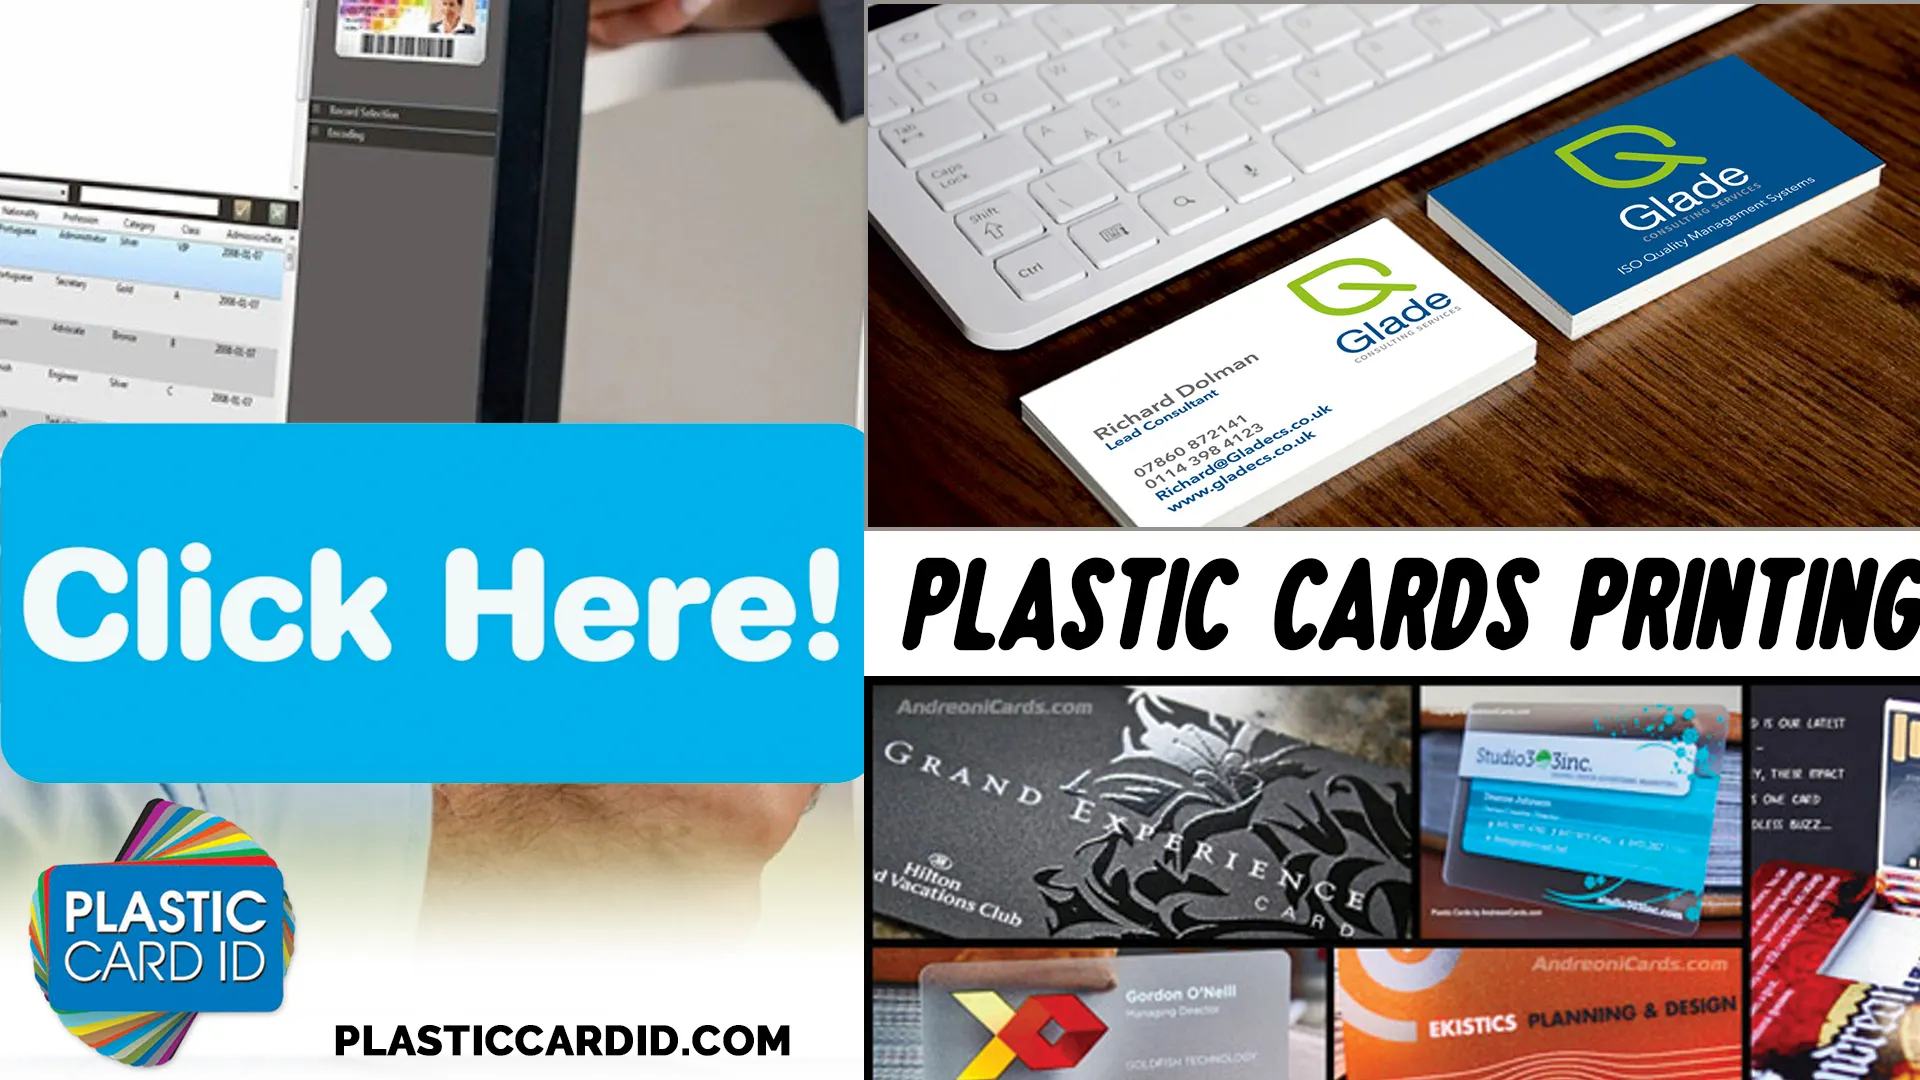 Plastic Card ID
's Certification and Compliance Advantage